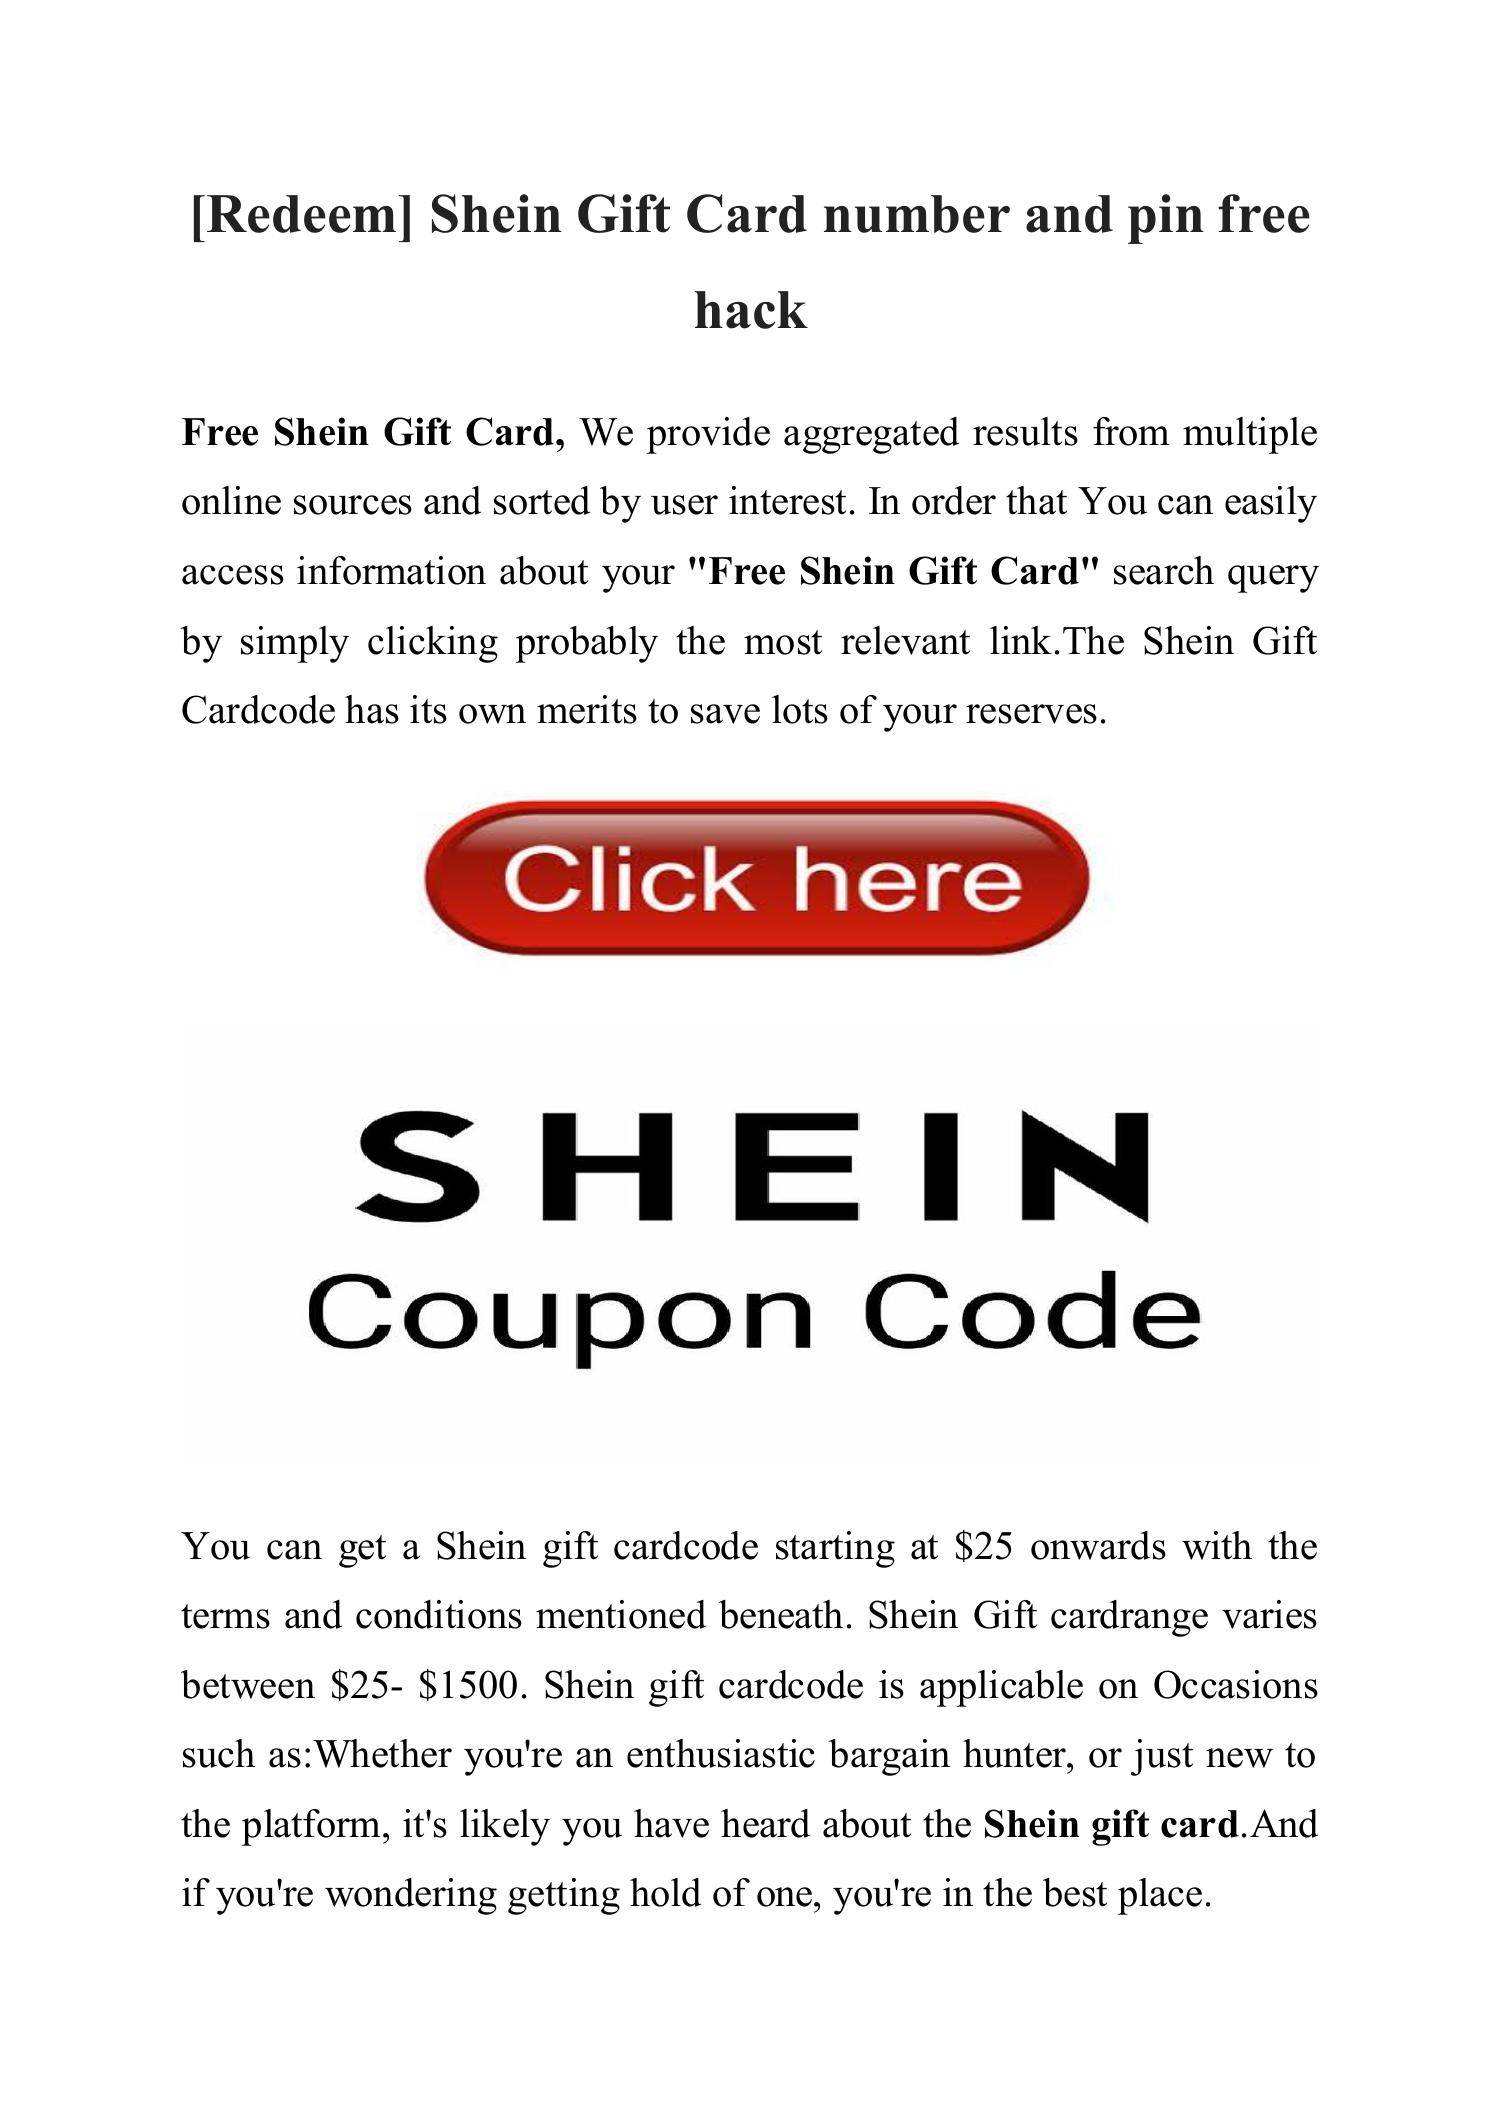 [Redeem] Shein Gift Card number and pin free hack.pdf DocDroid